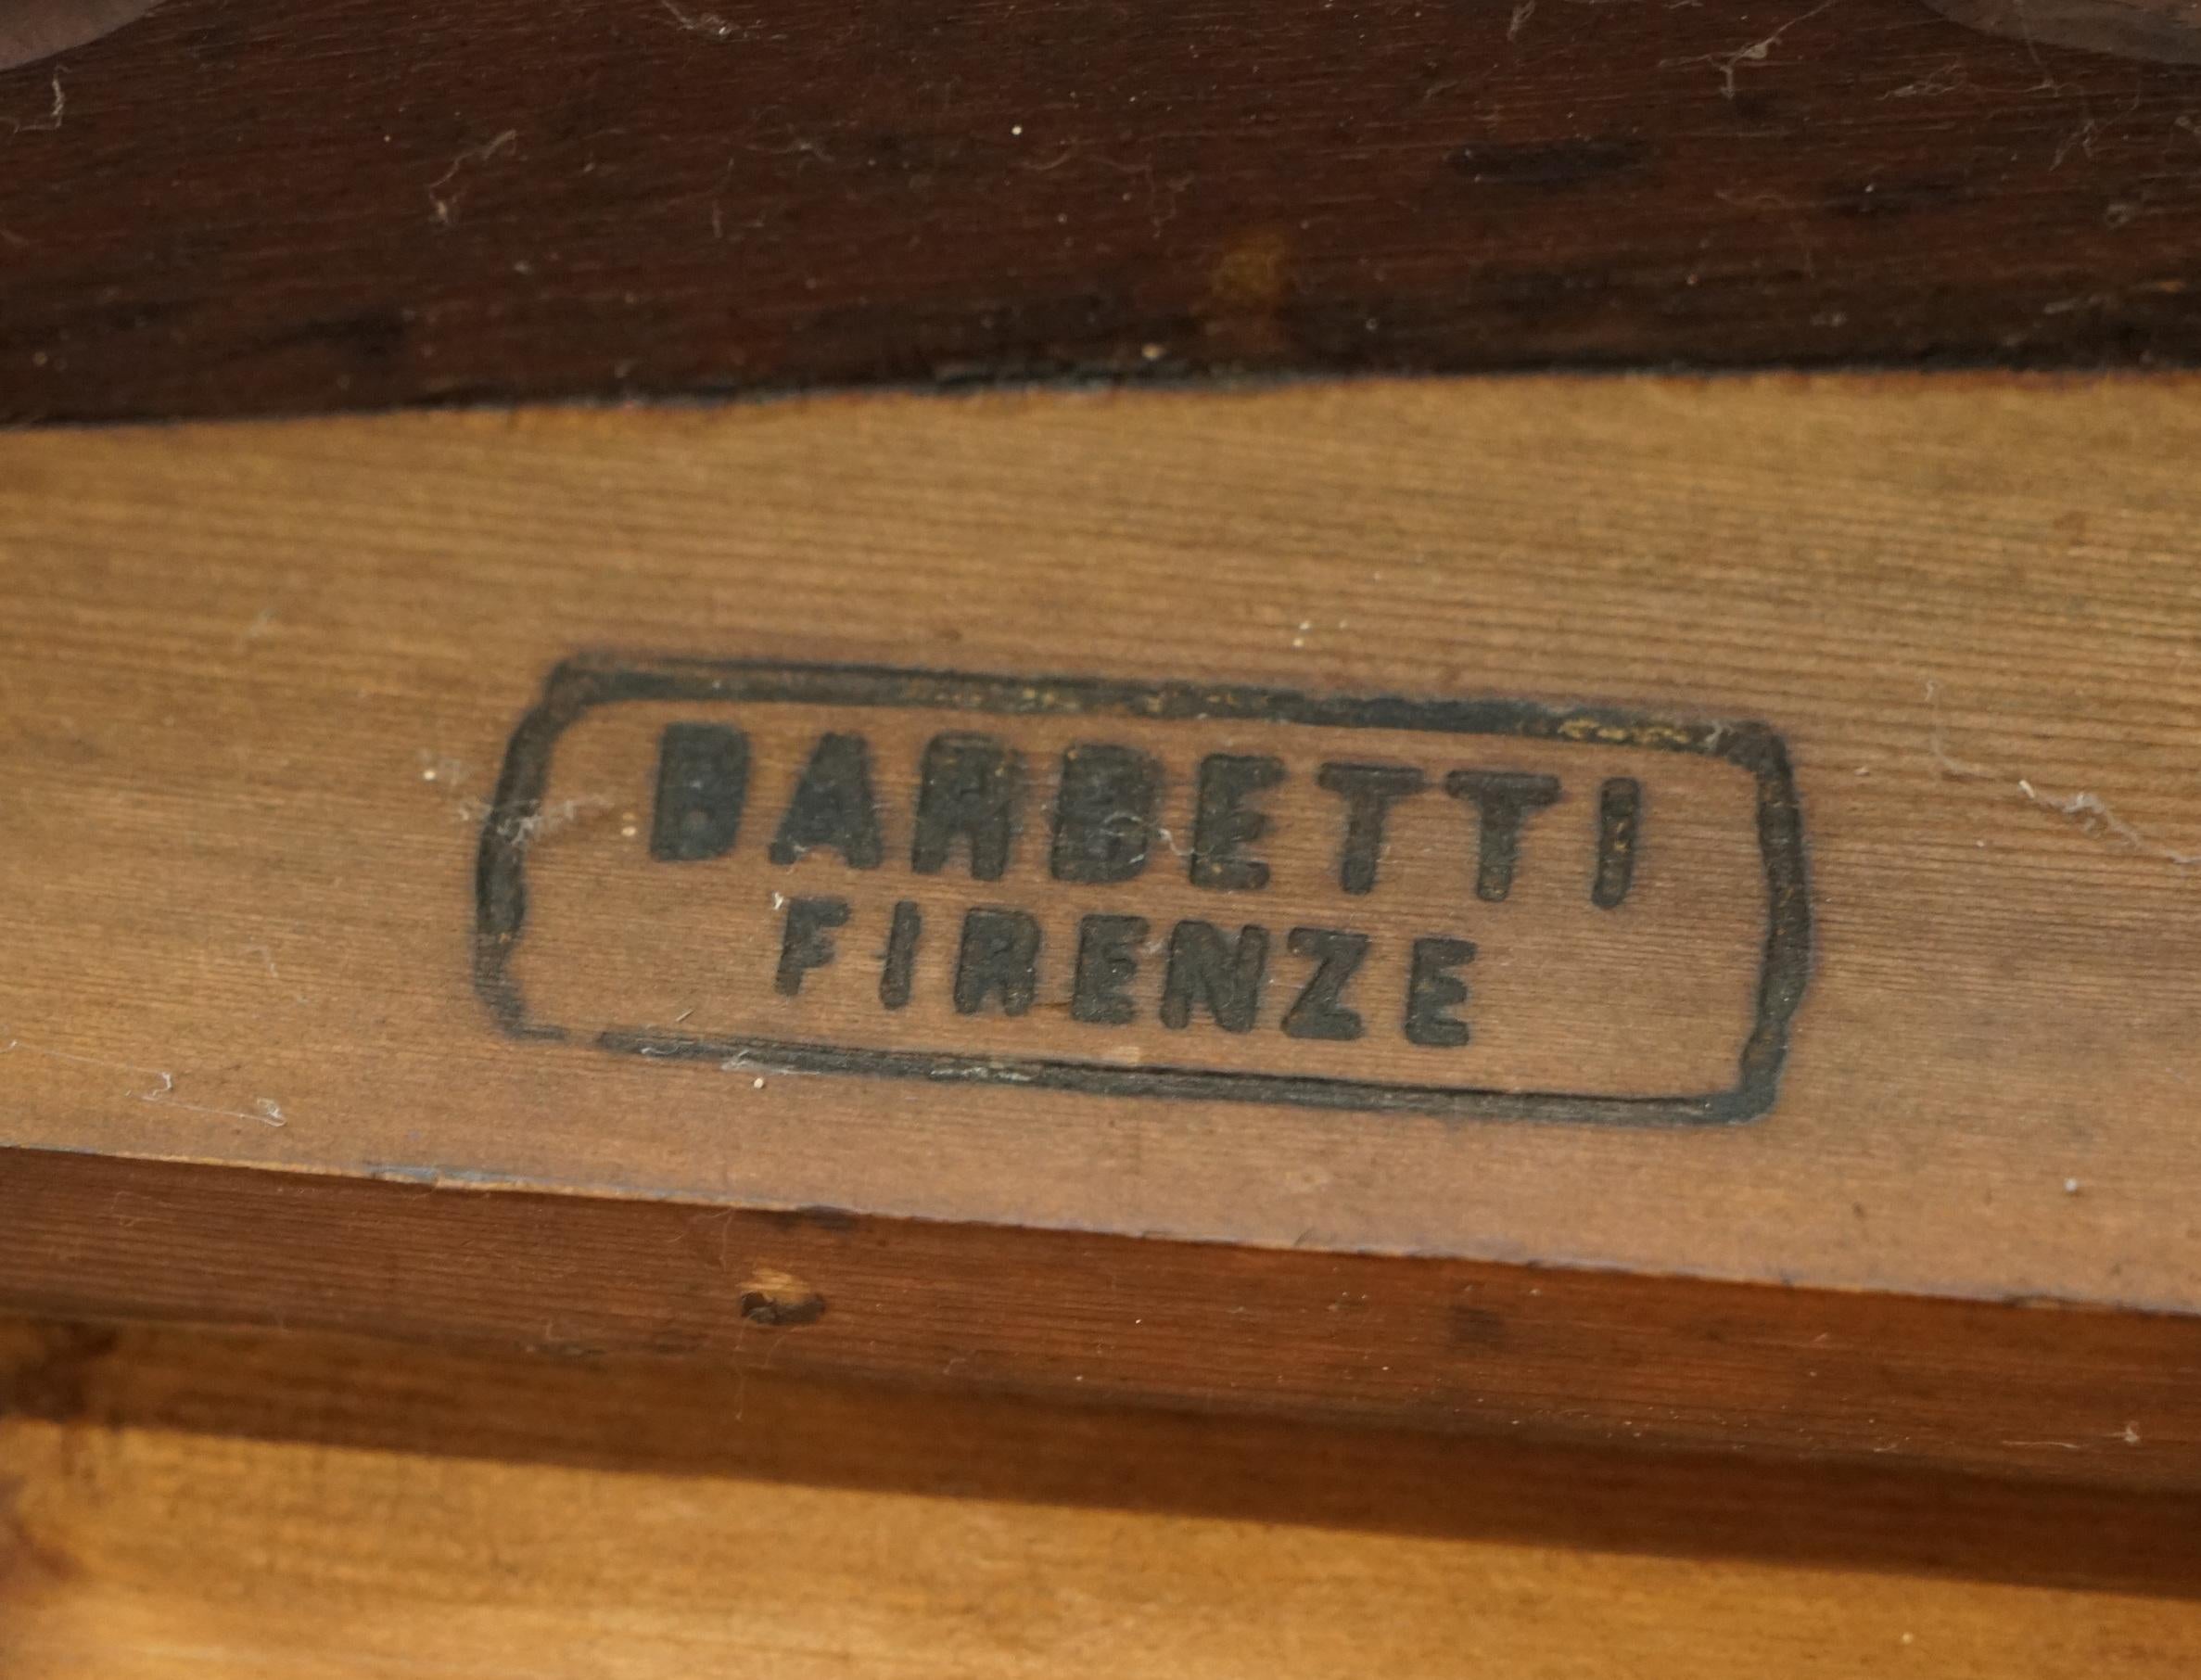 We are delighted to offer for sale this very rare and extremely important hand carved walnut fully stamped library table by Angiolo Barbetti of Firenze

What a find… this table is by one of the finest Italian carvers of all time, dating to circa